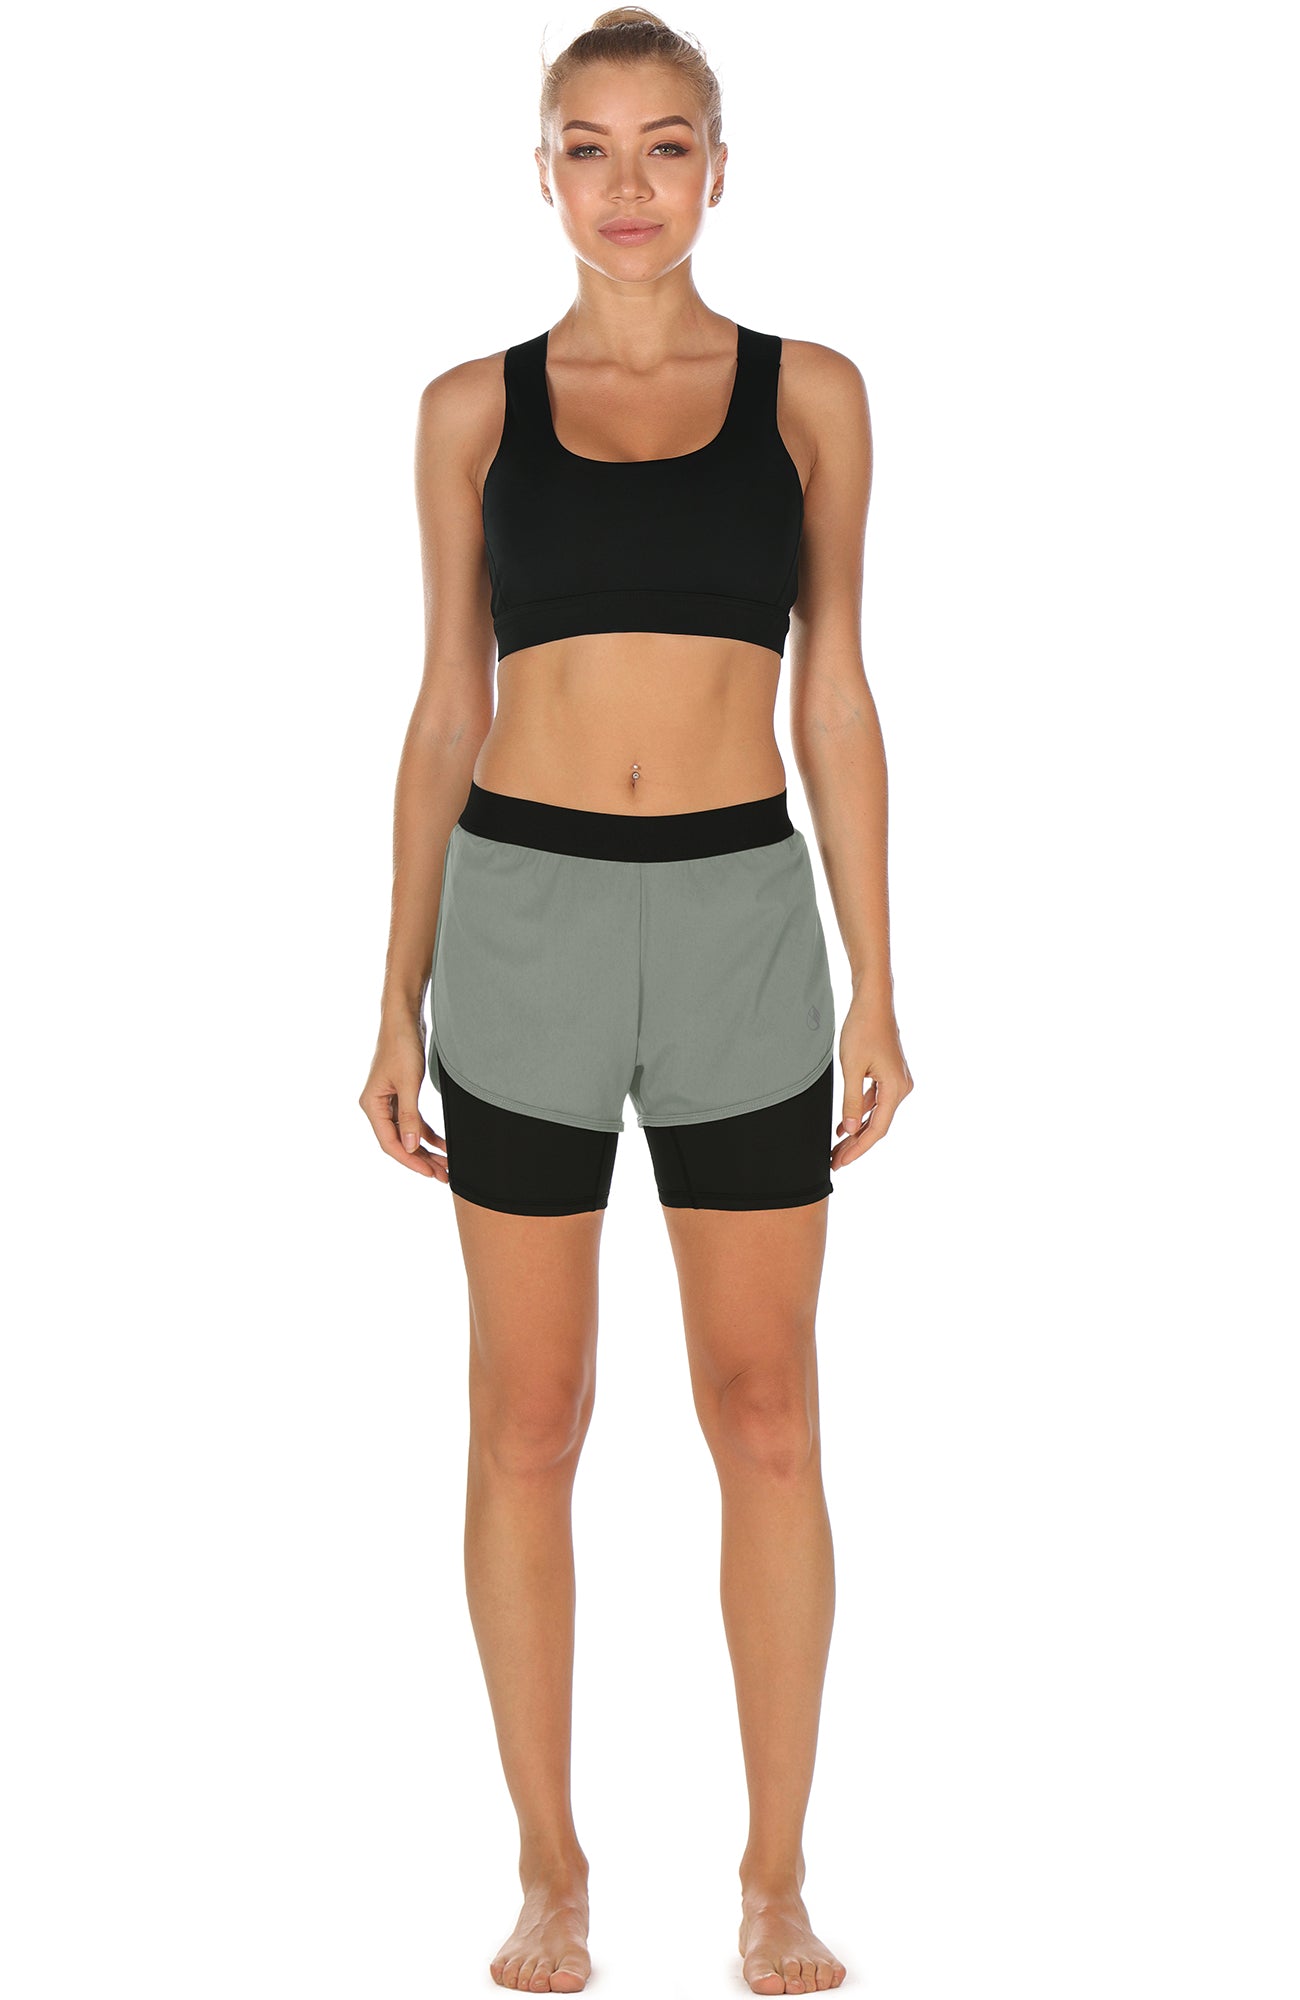 icyzone Workout Shorts for Women - Activewear Exercise Athletic